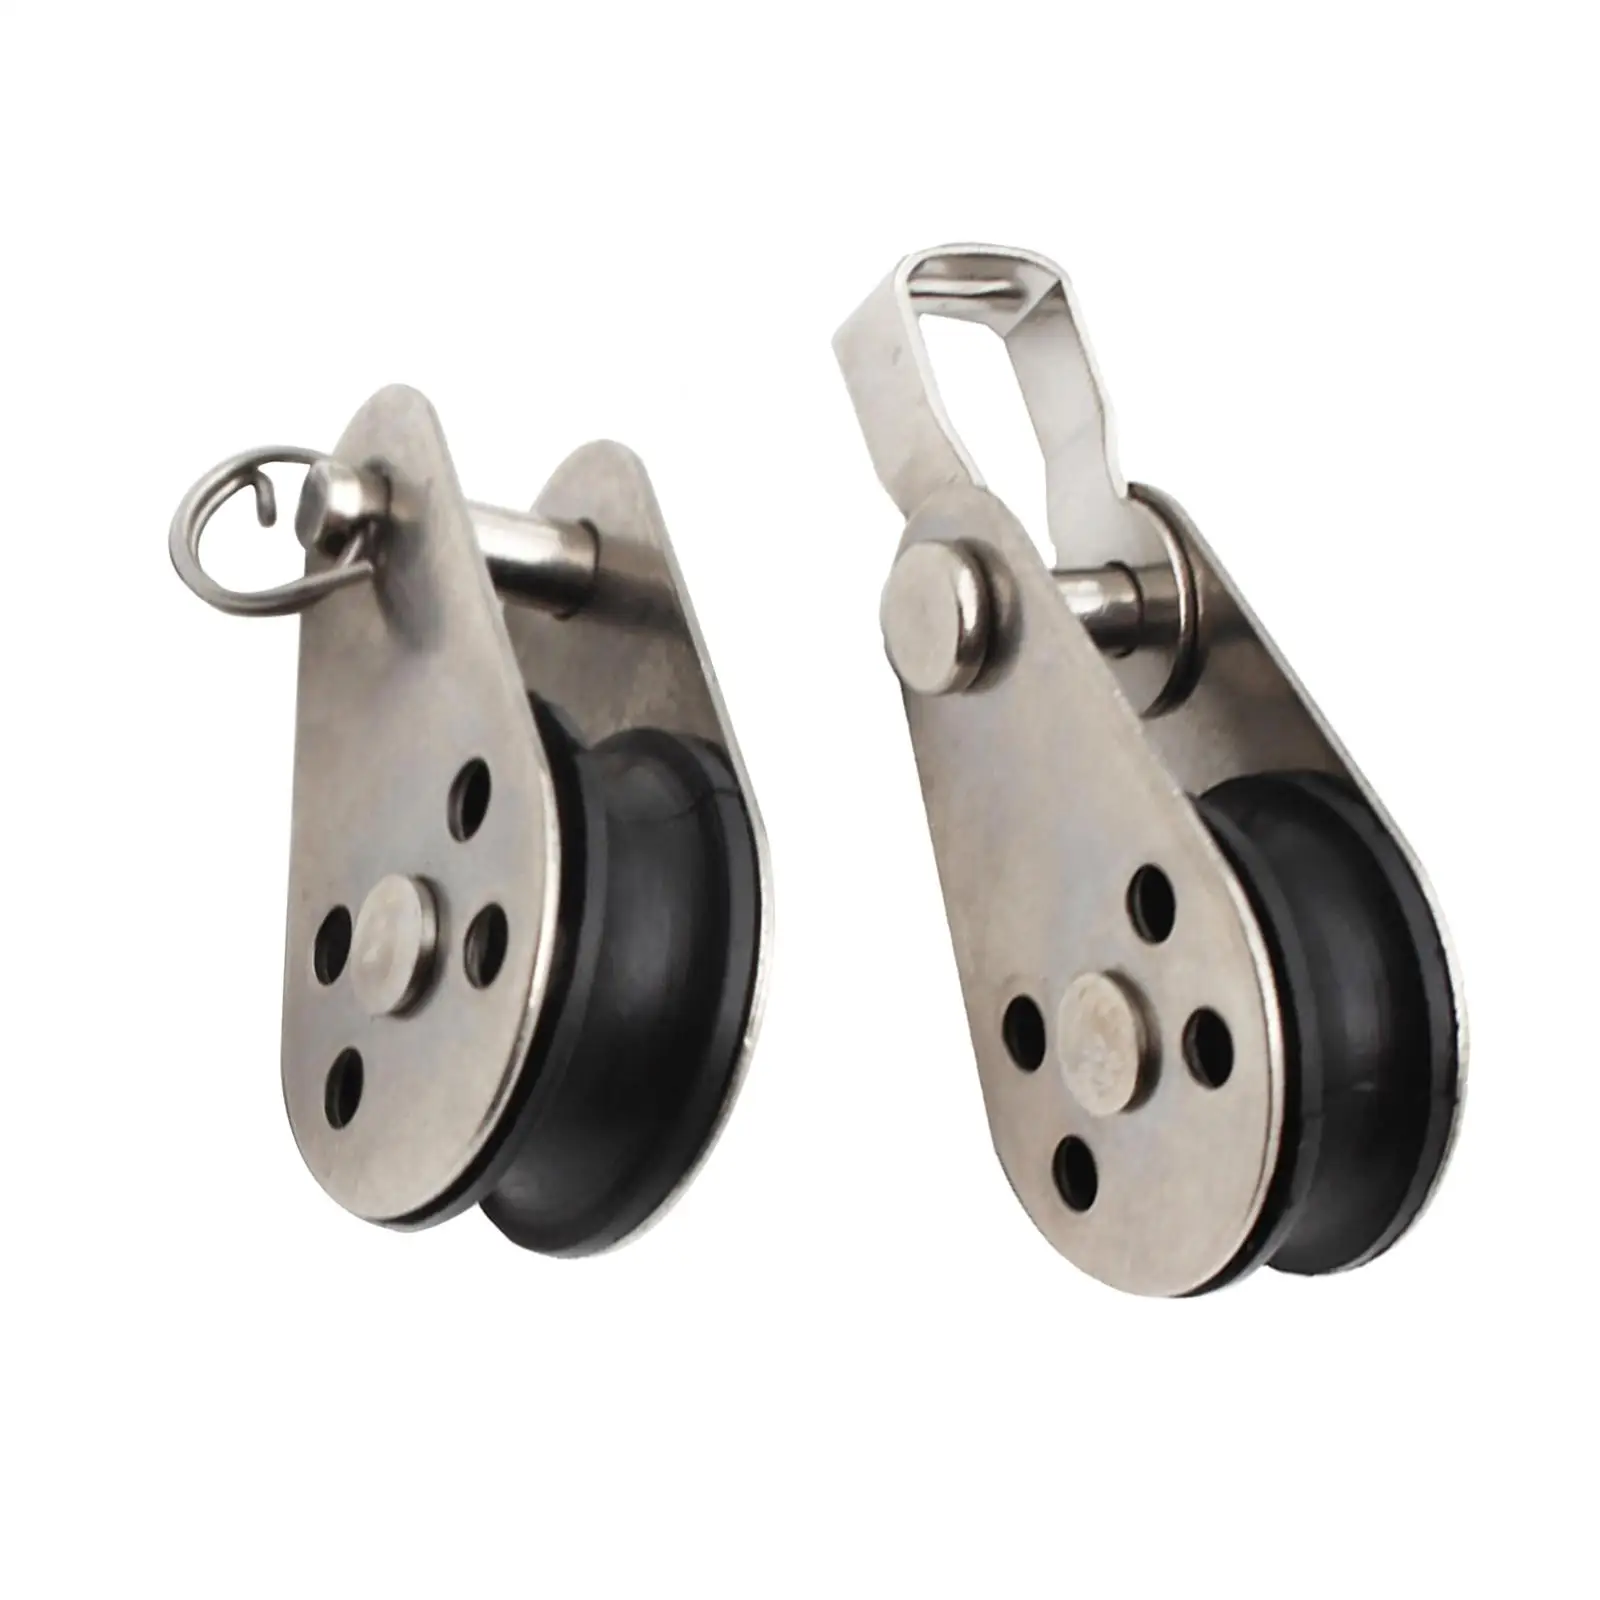 

Marine Pulley Block Swivel Tools 304 Stainless Steel Hardware Single Wheel Fixed Pulley for Lifting Home Improvement